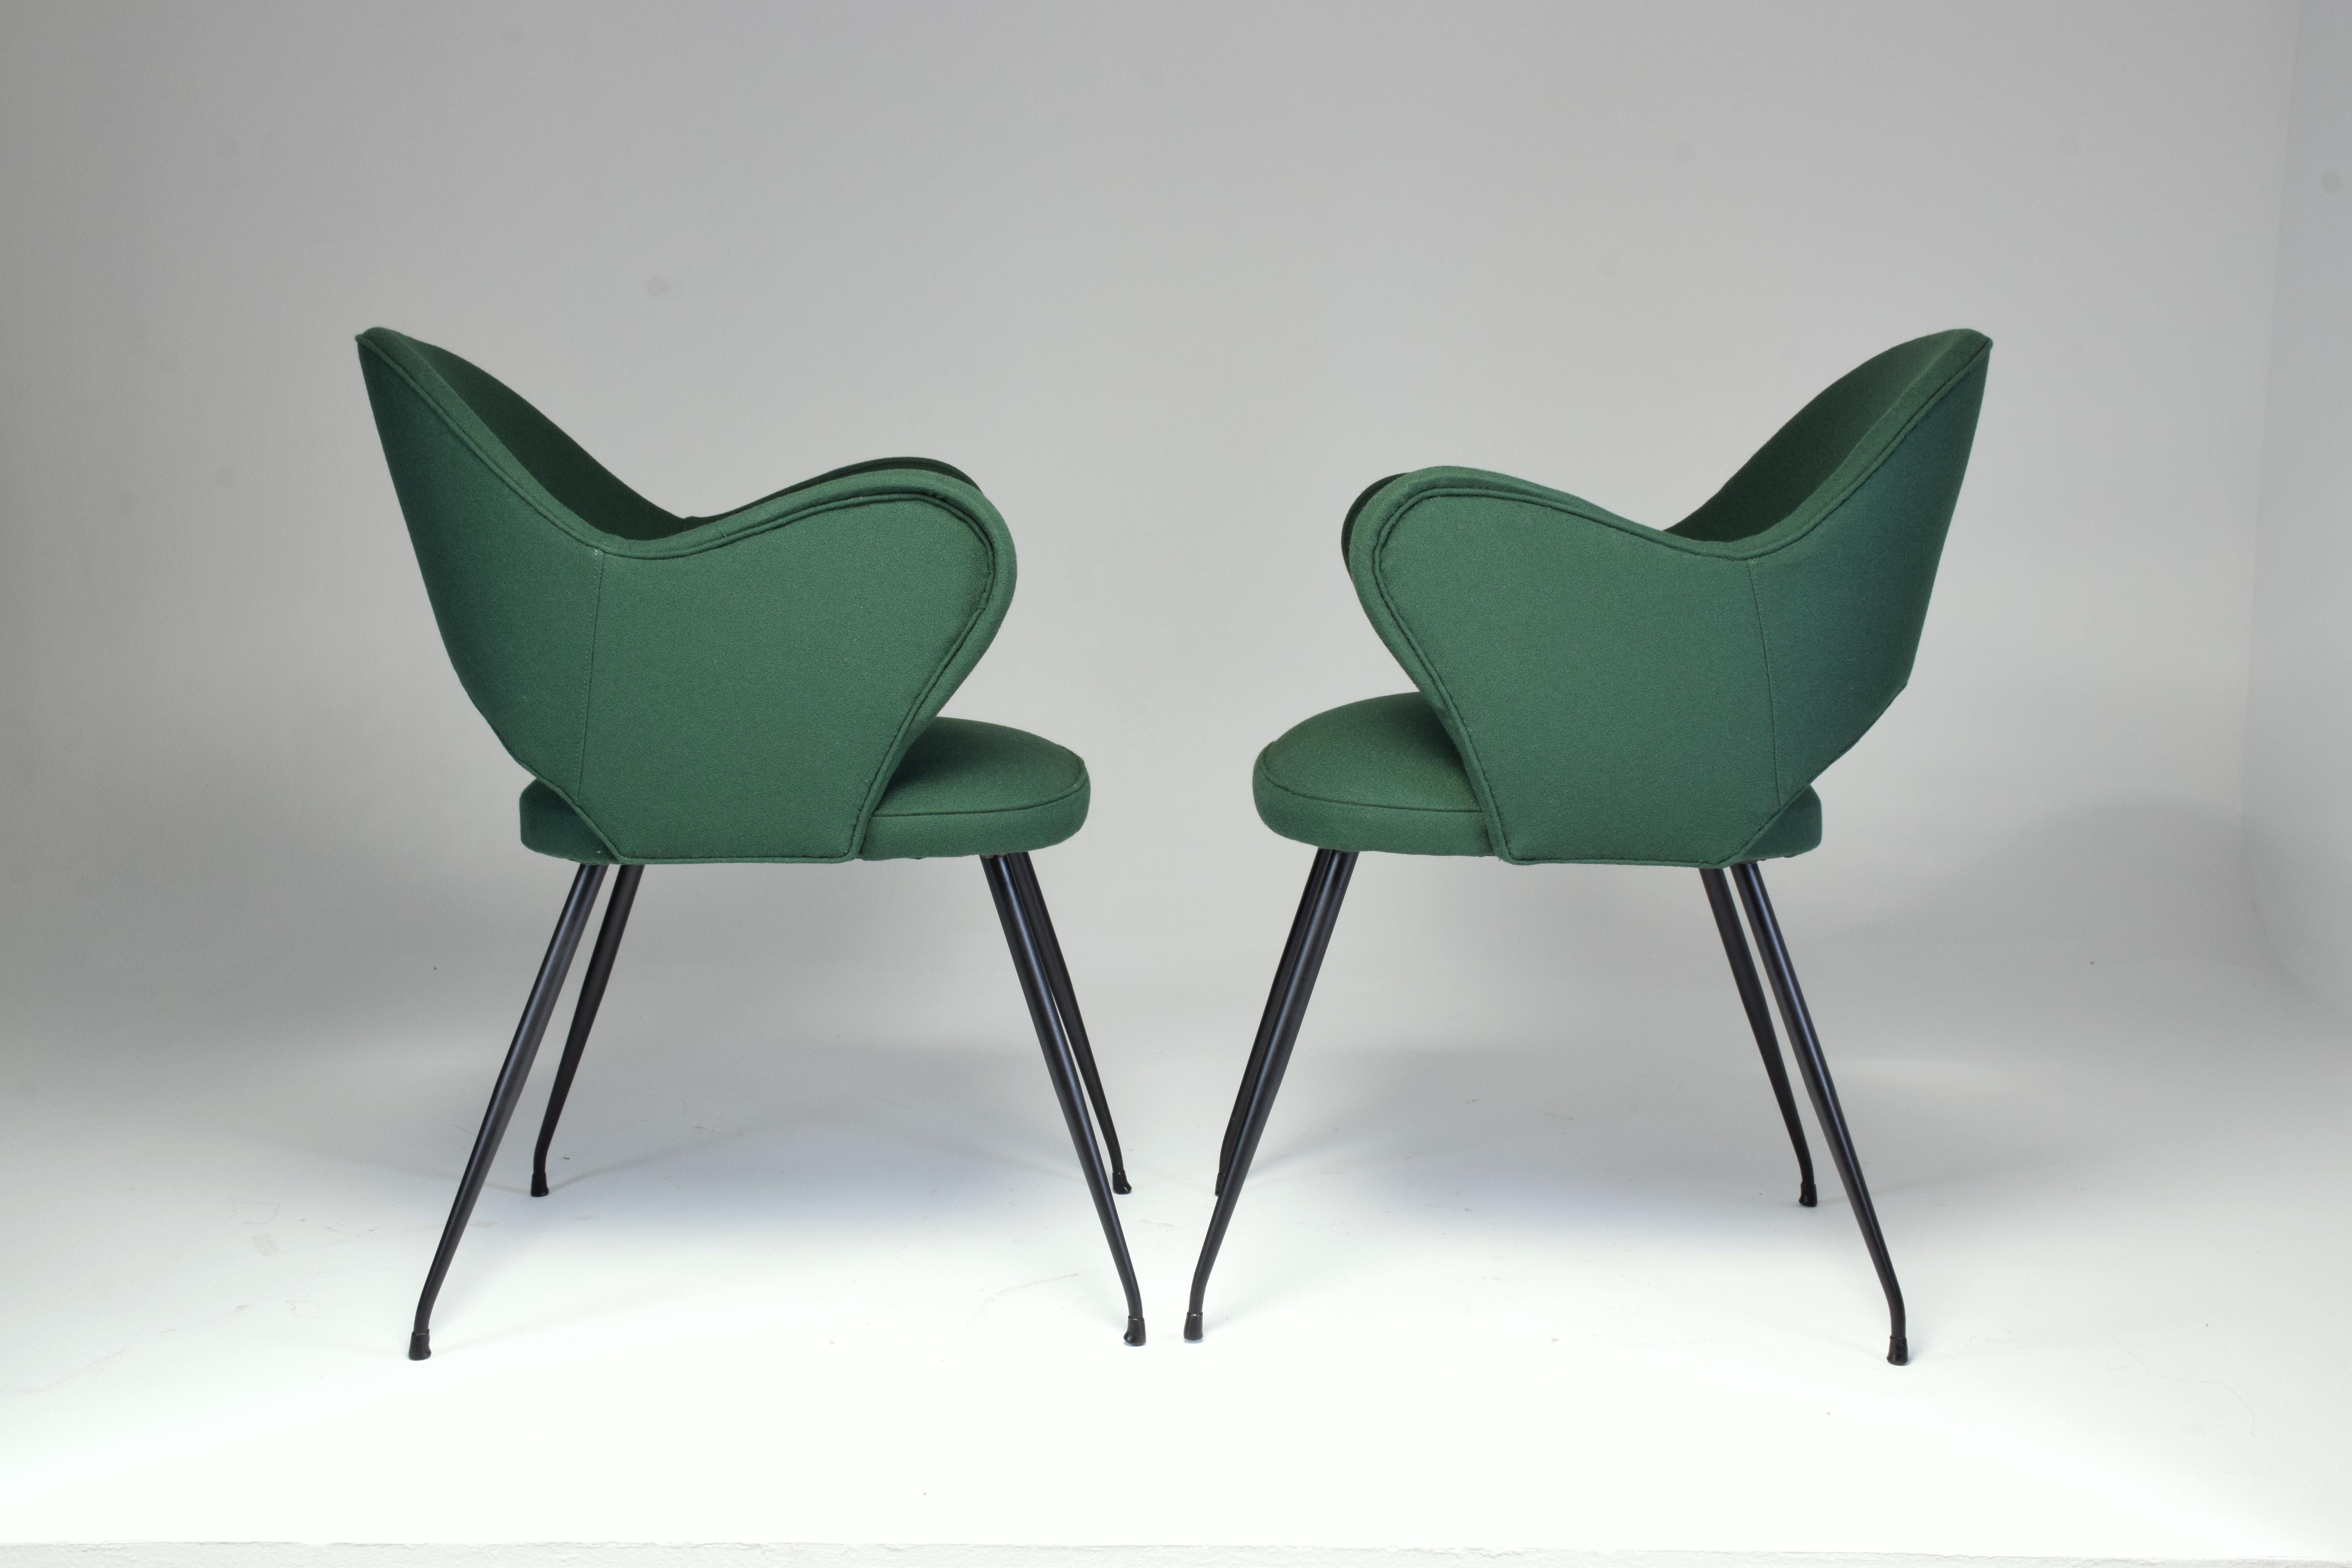 A Mid-Century Modern vintage set of two green armchairs of Italian design in re-upholstered green wool fabric.
Entirely restored, these two side or accent chairs are designed with graceful wing-shaped armrests and deep black elegant re-lacquered